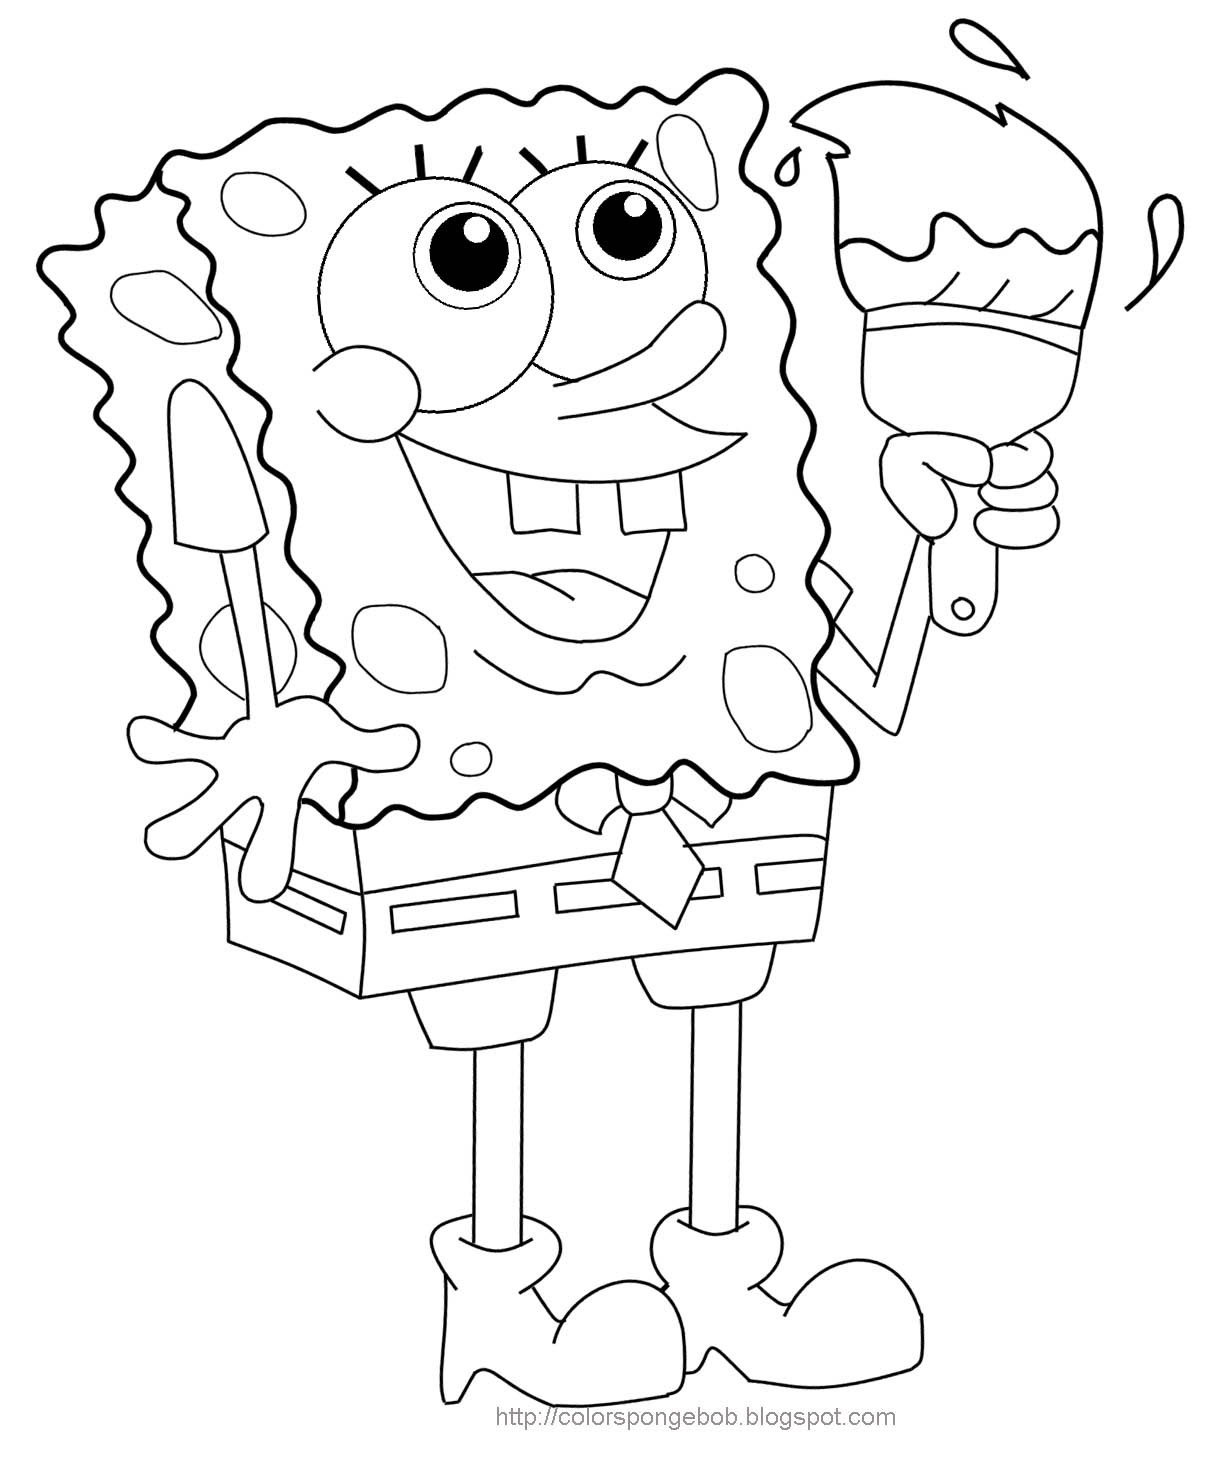 Free Coloring Pages Of Spongebob Christmas Effy Moom Free Coloring Picture wallpaper give a chance to color on the wall without getting in trouble! Fill the walls of your home or office with stress-relieving [effymoom.blogspot.com]